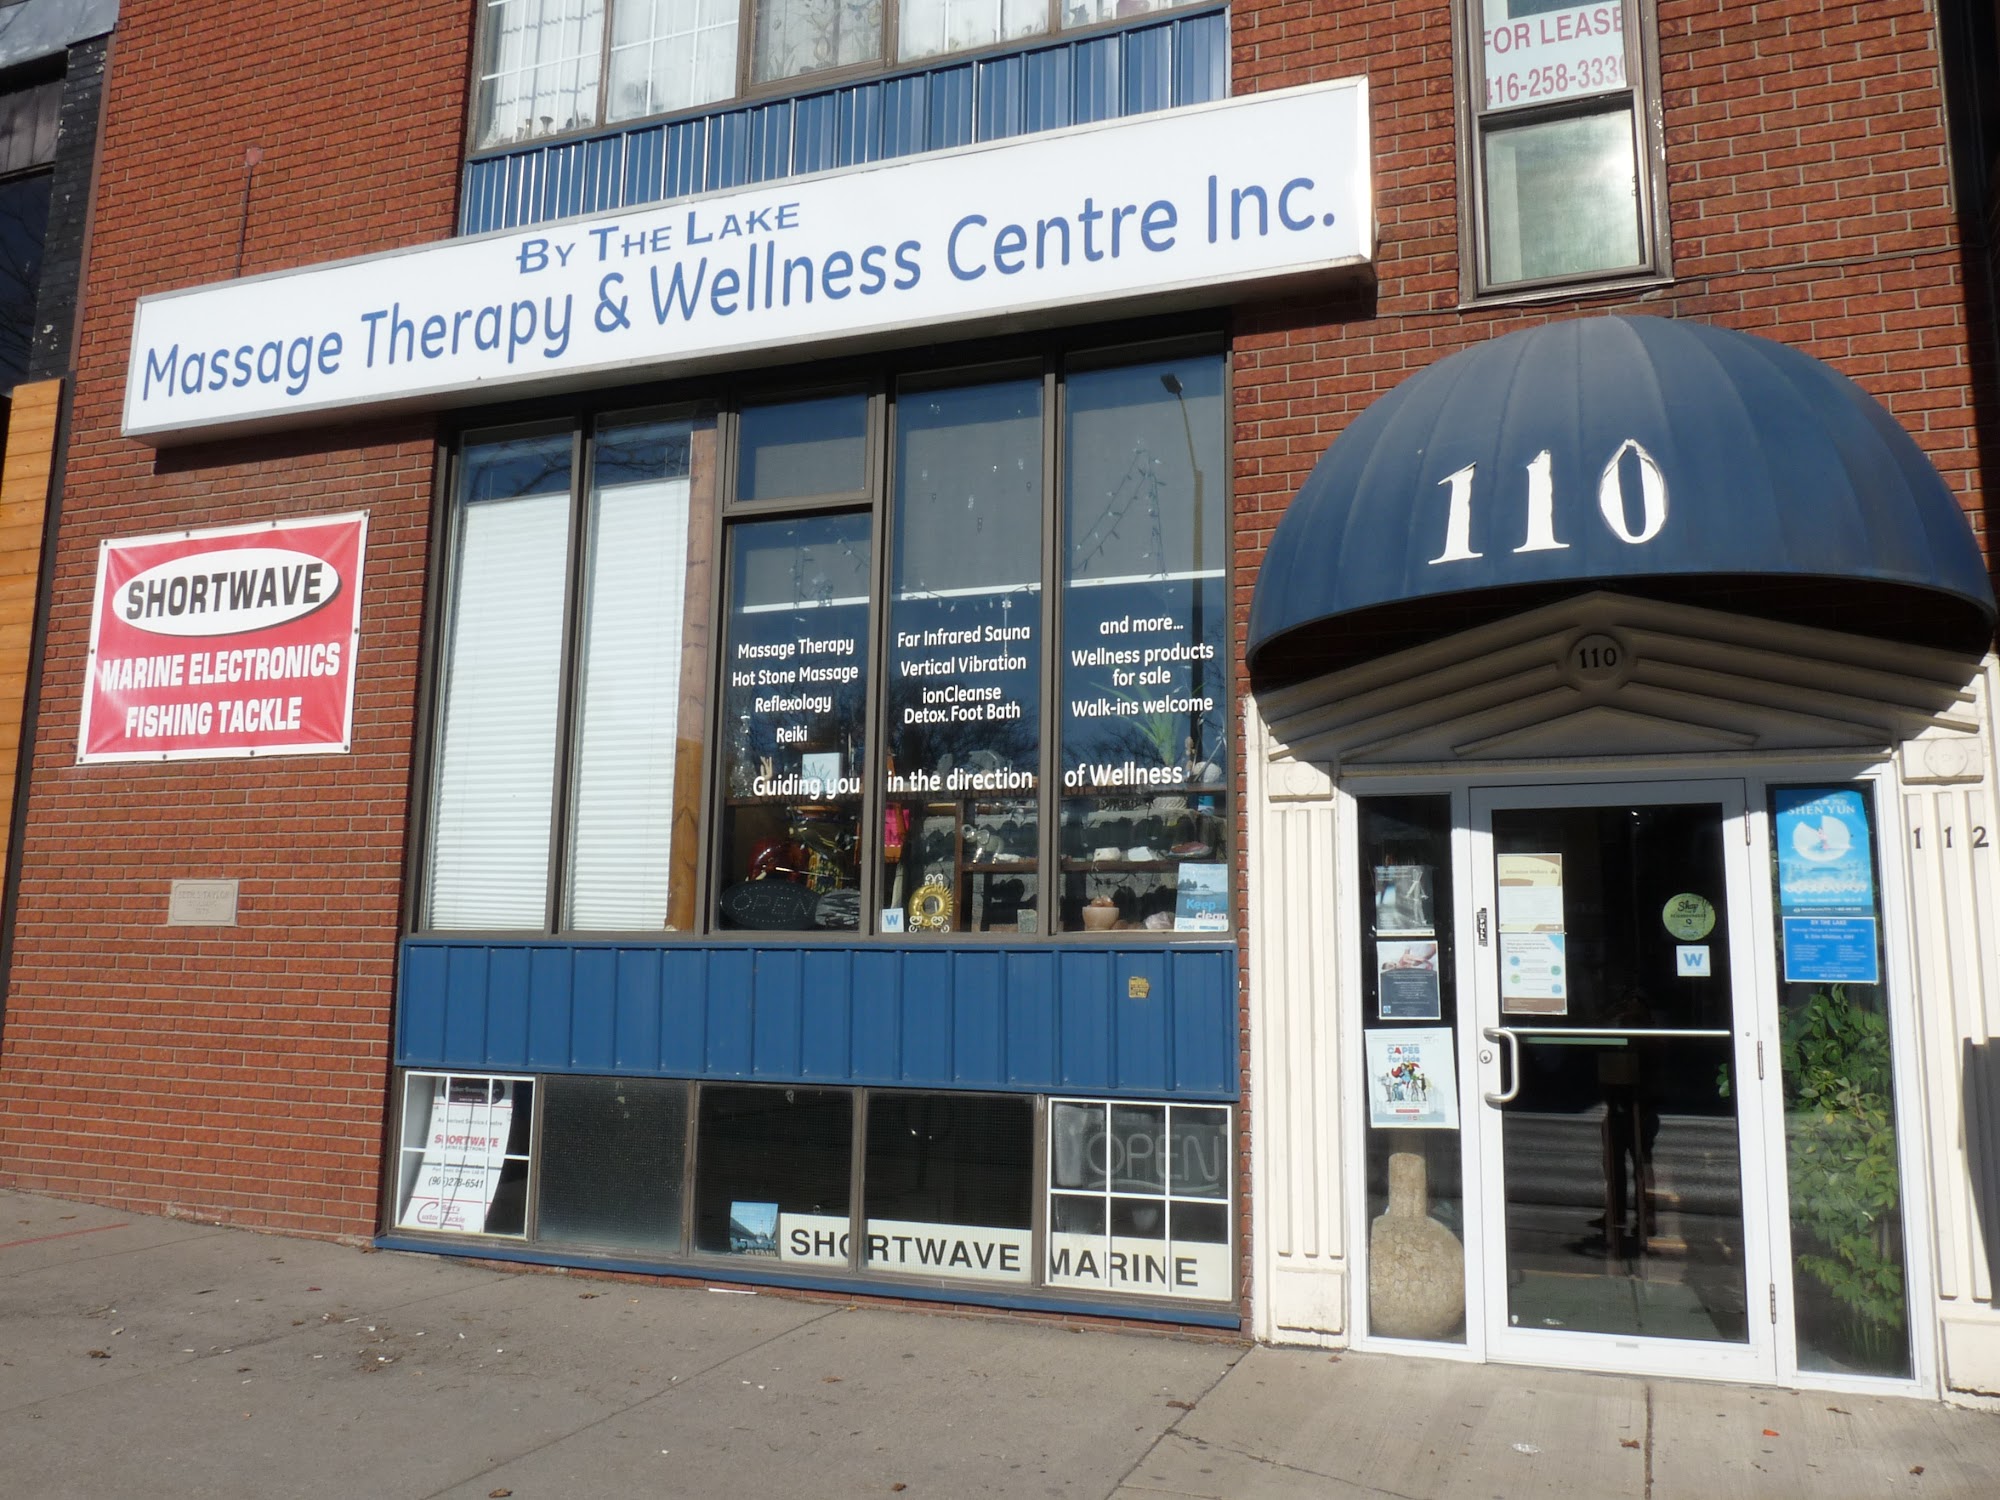 By The Lake Massage Therapy & Wellness Centre Inc.